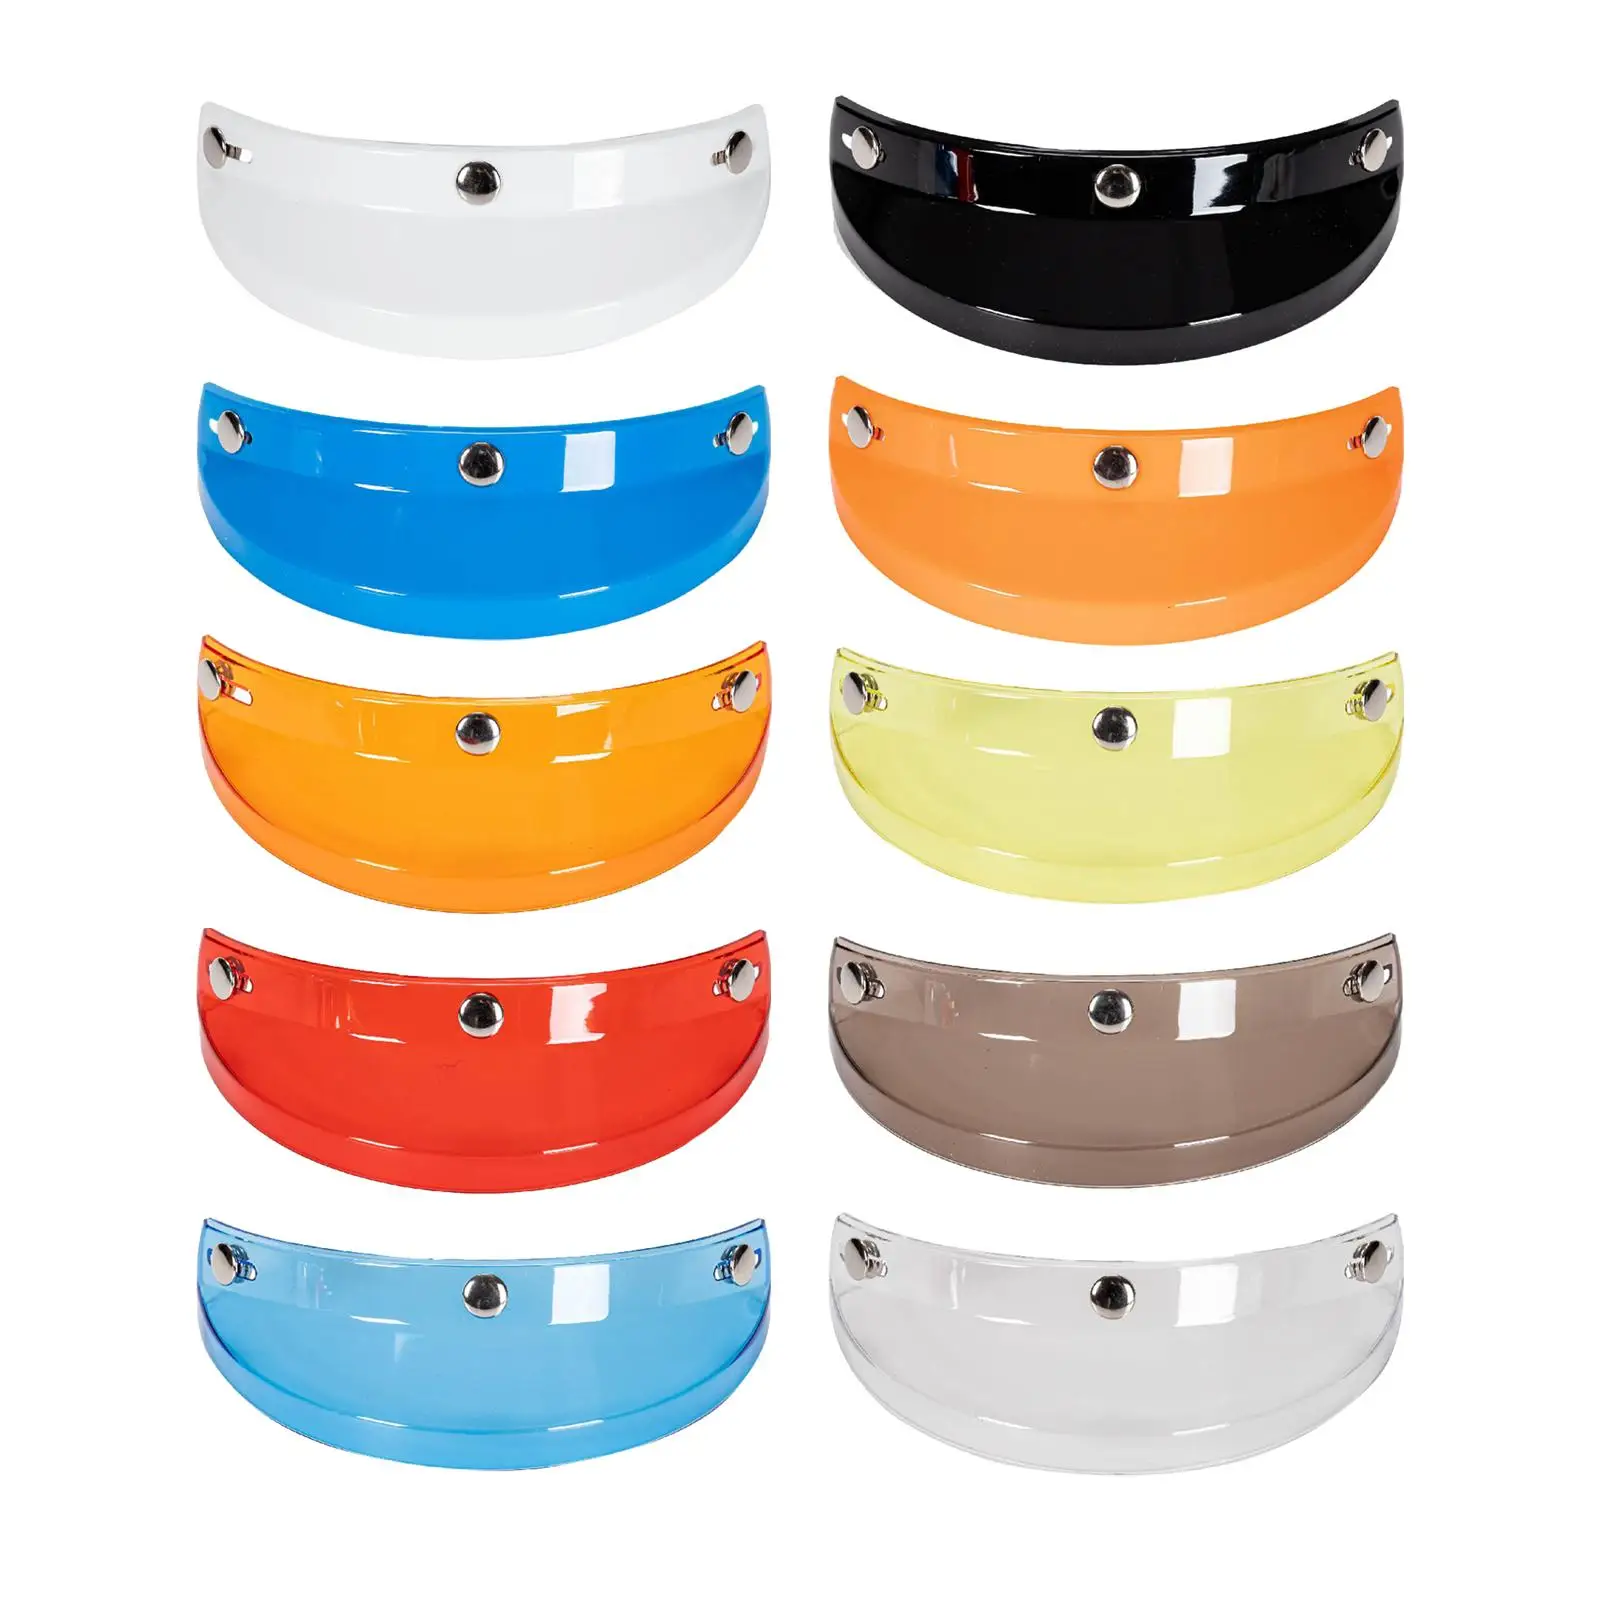 

Visor 3 Snap universal Shade for s with 3 Buttons Replacement Easy to Install Spare Parts